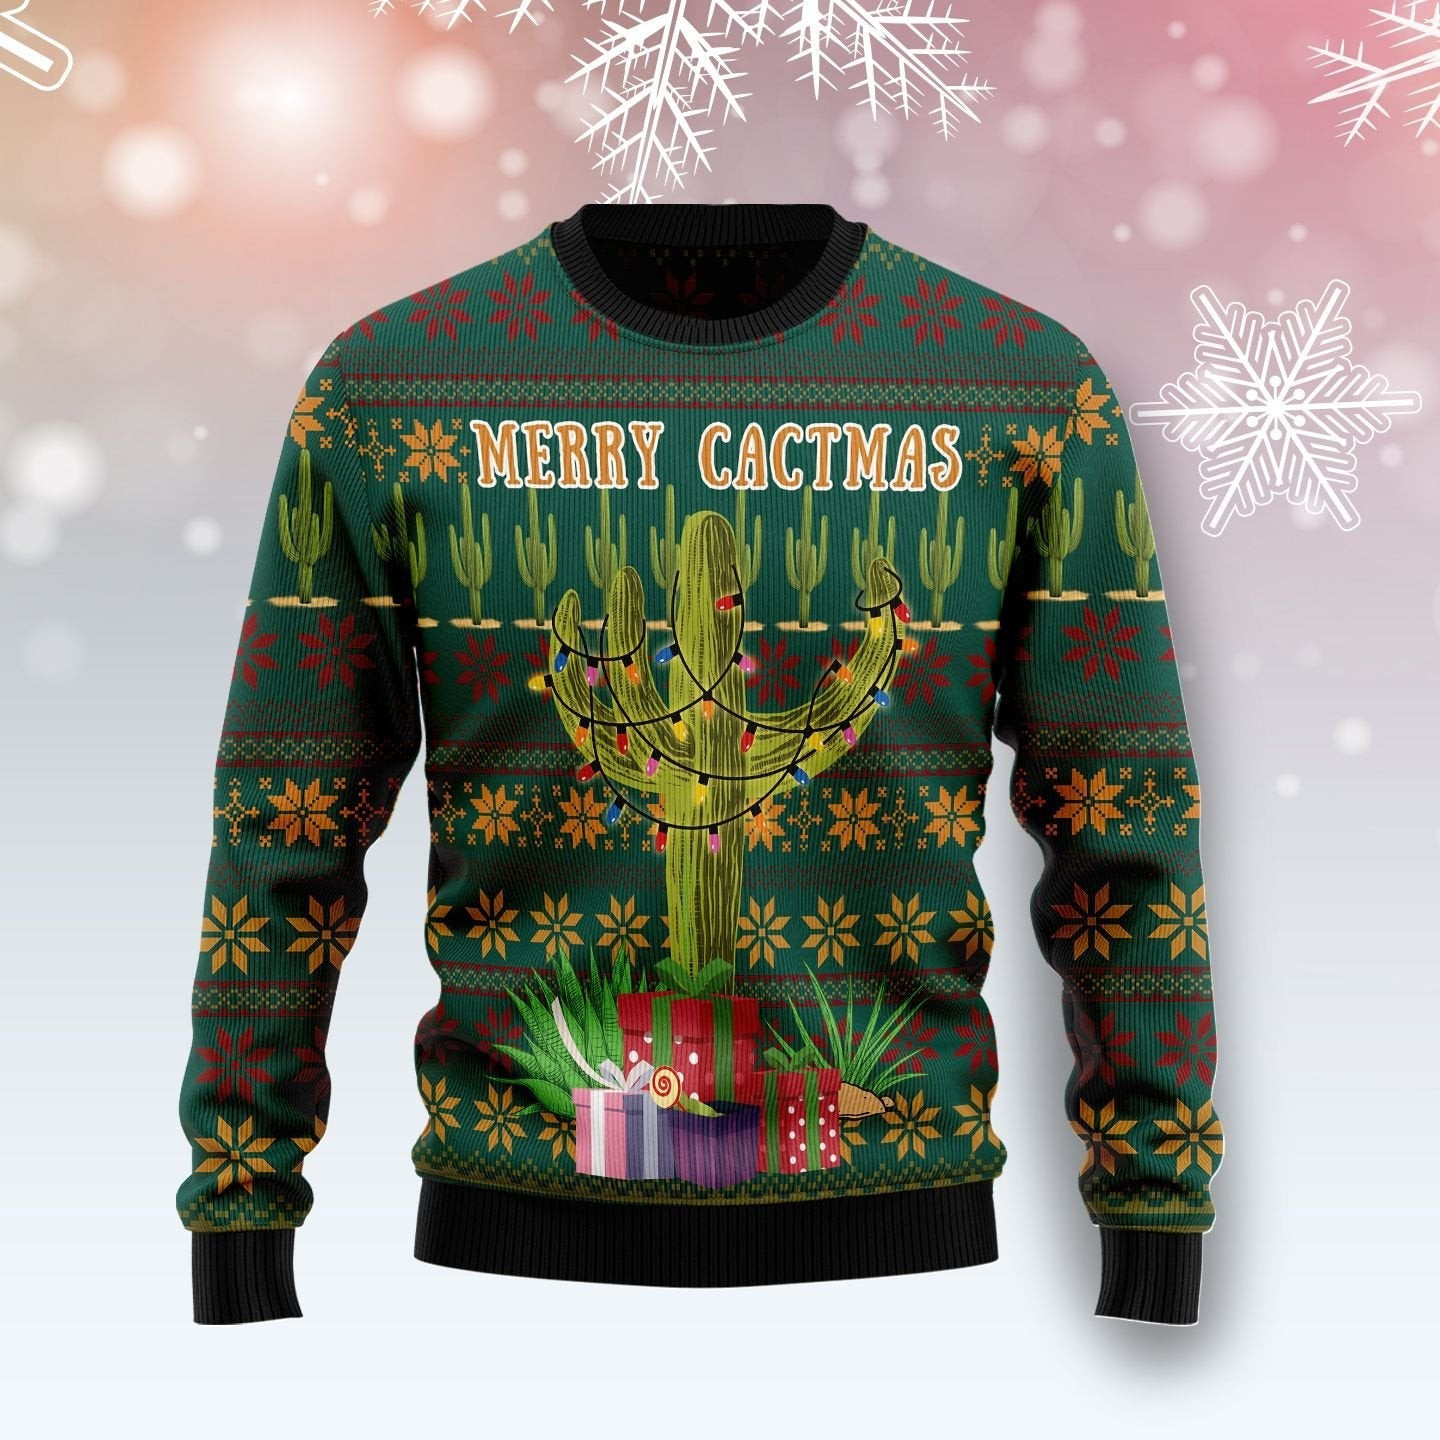 Cactus Ugly Christmas Sweater, Ugly Sweater For Men Women, Holiday Sweater